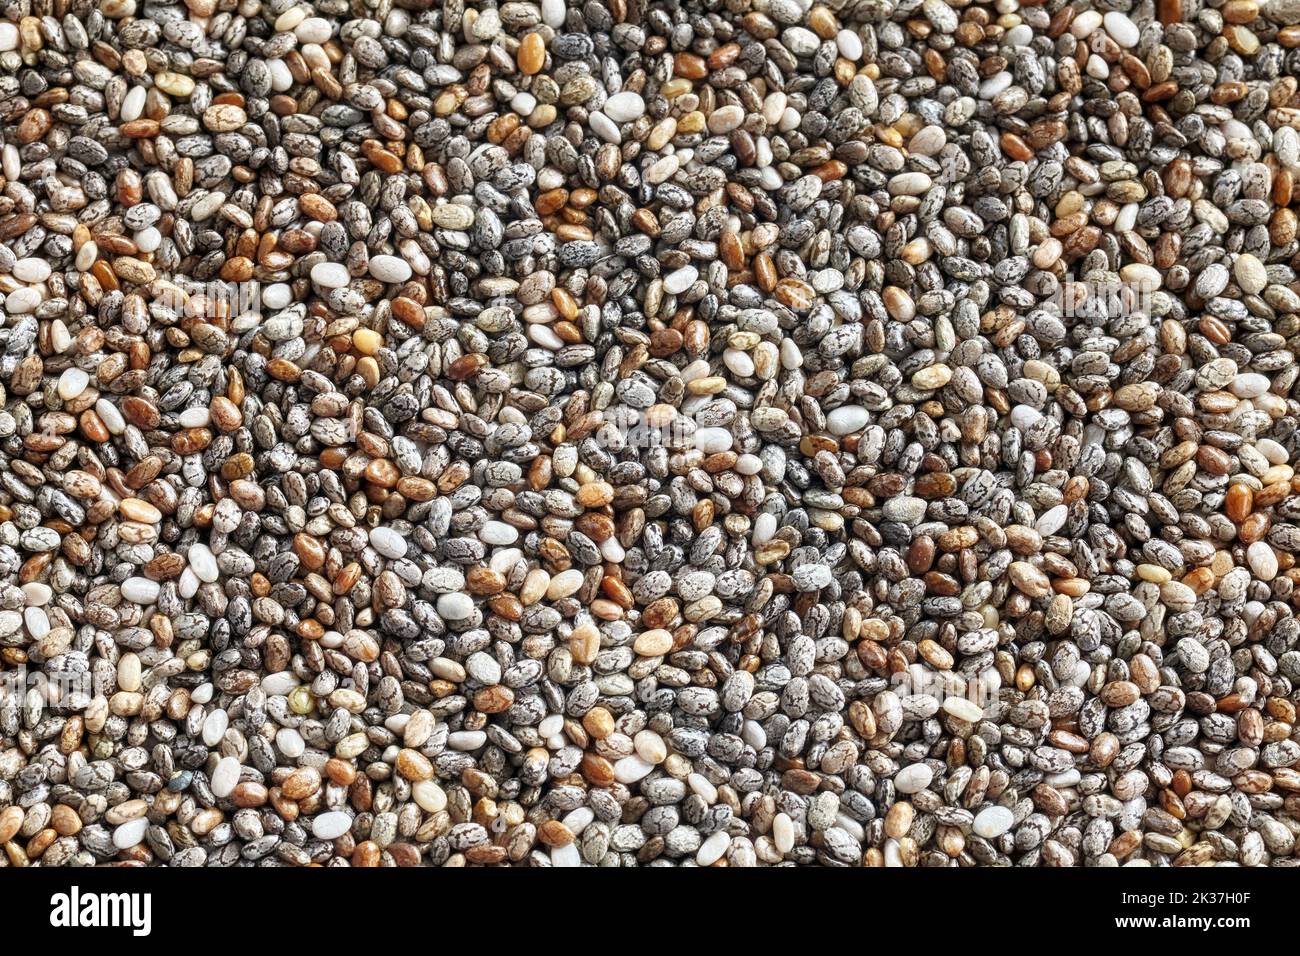 Close up picture of chia seeds. Stock Photo